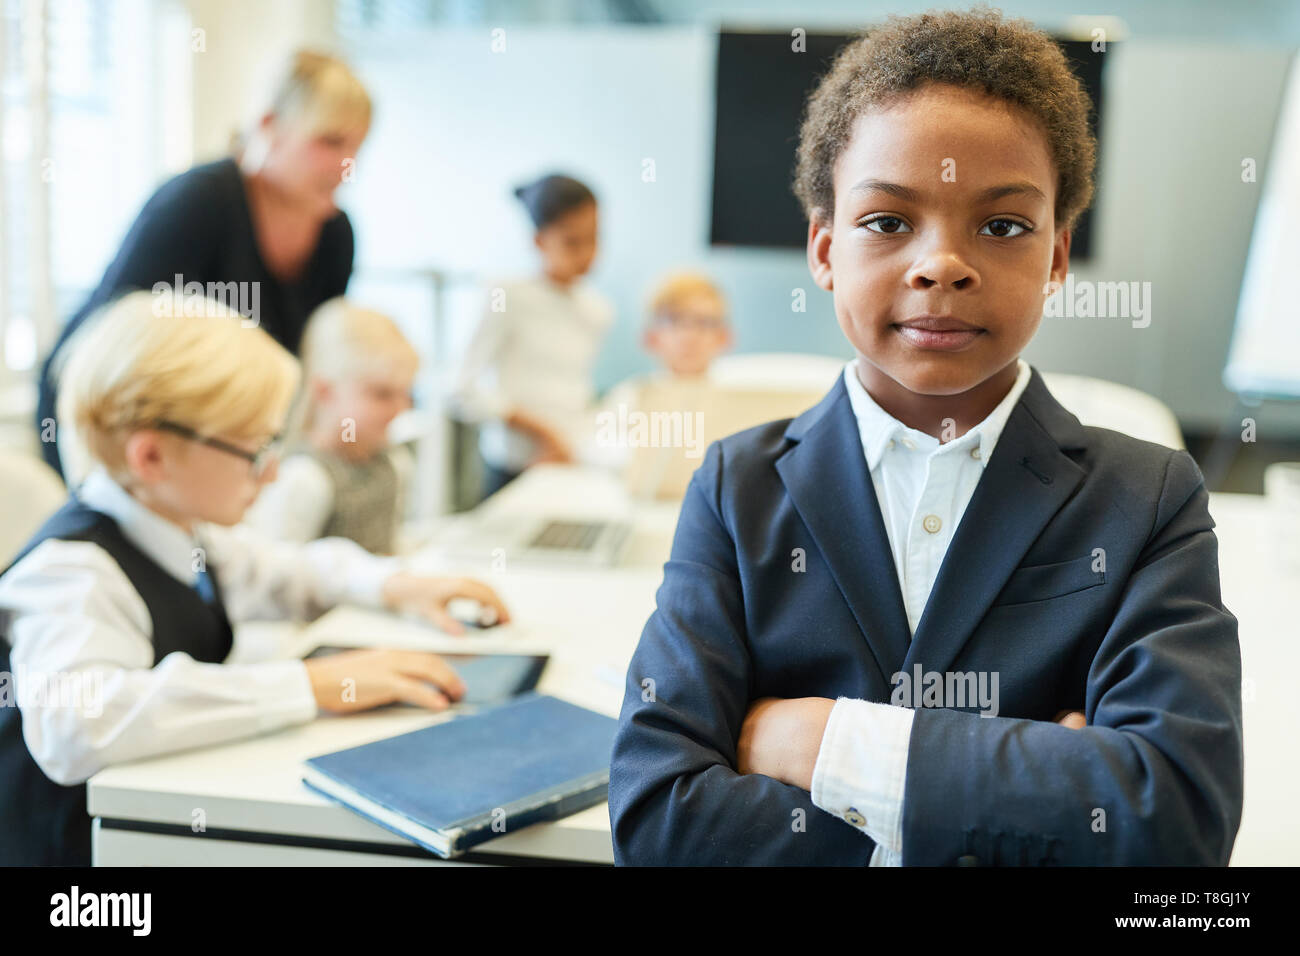 African child with crossed arms as a manager in front of a kids business team Stock Photo